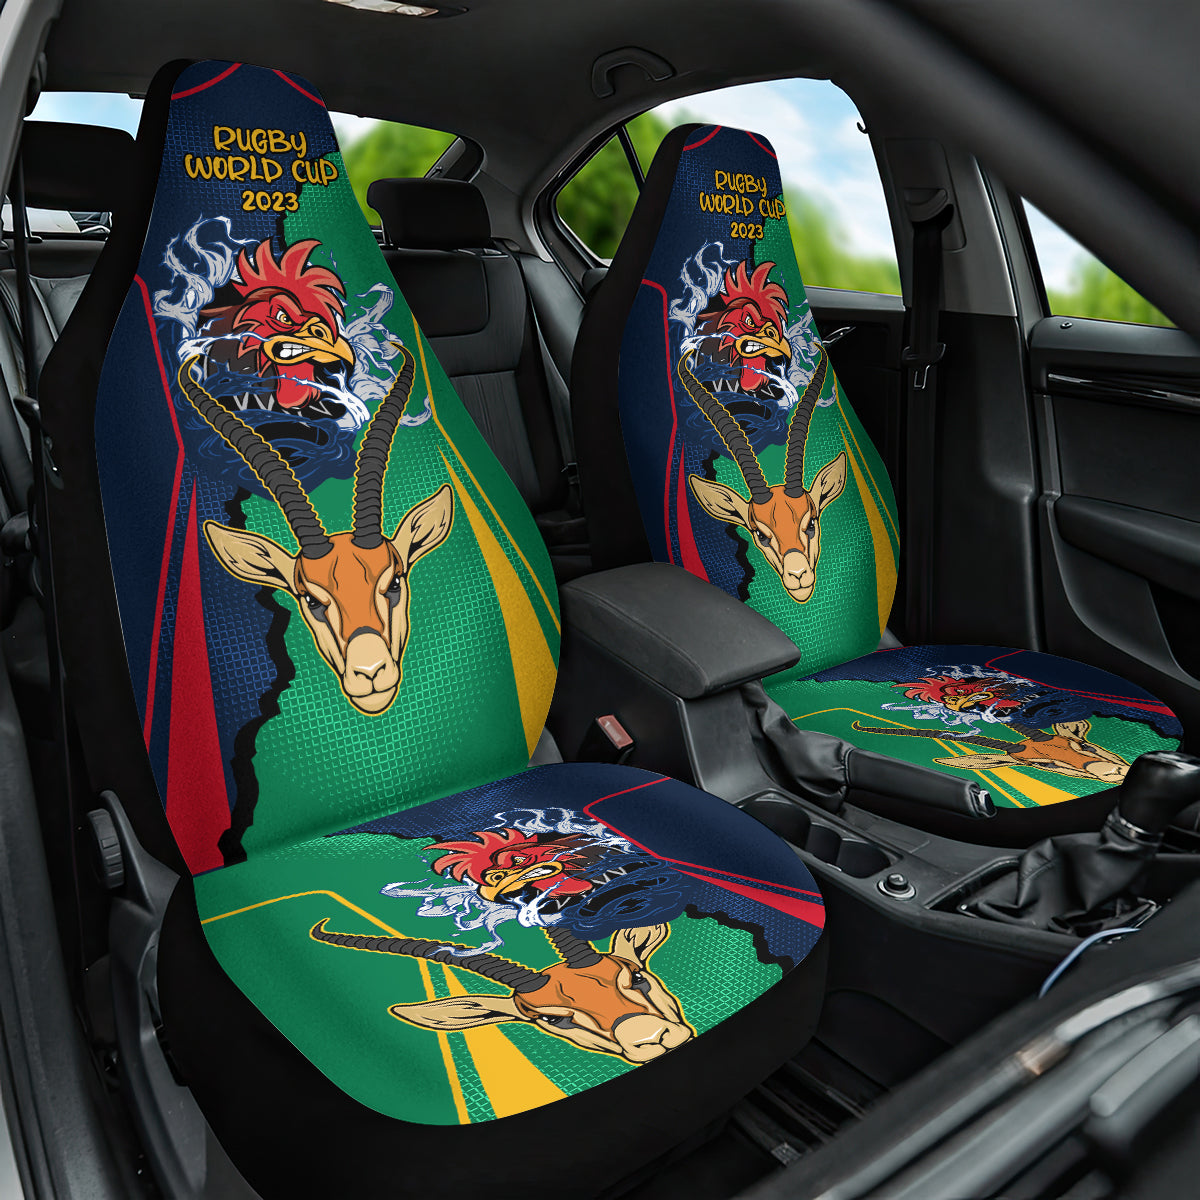 france-south-africa-rugby-car-seat-cover-springboks-and-gallic-rooster-world-cup-2023